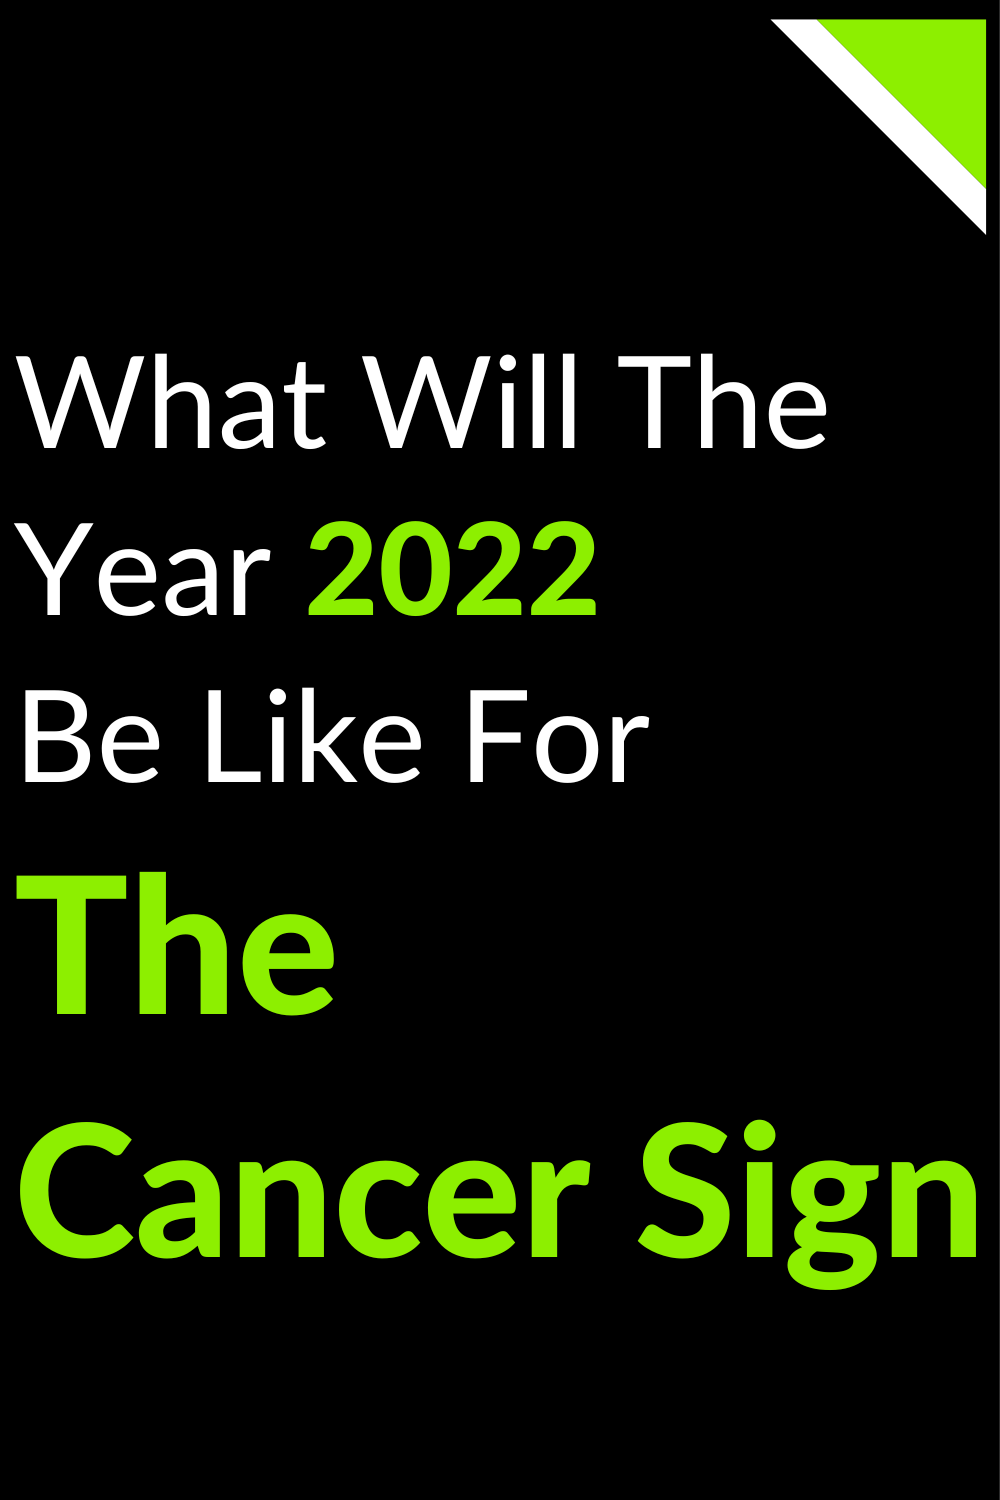 What Will The Year 2022 Be Like For The Cancer Sign